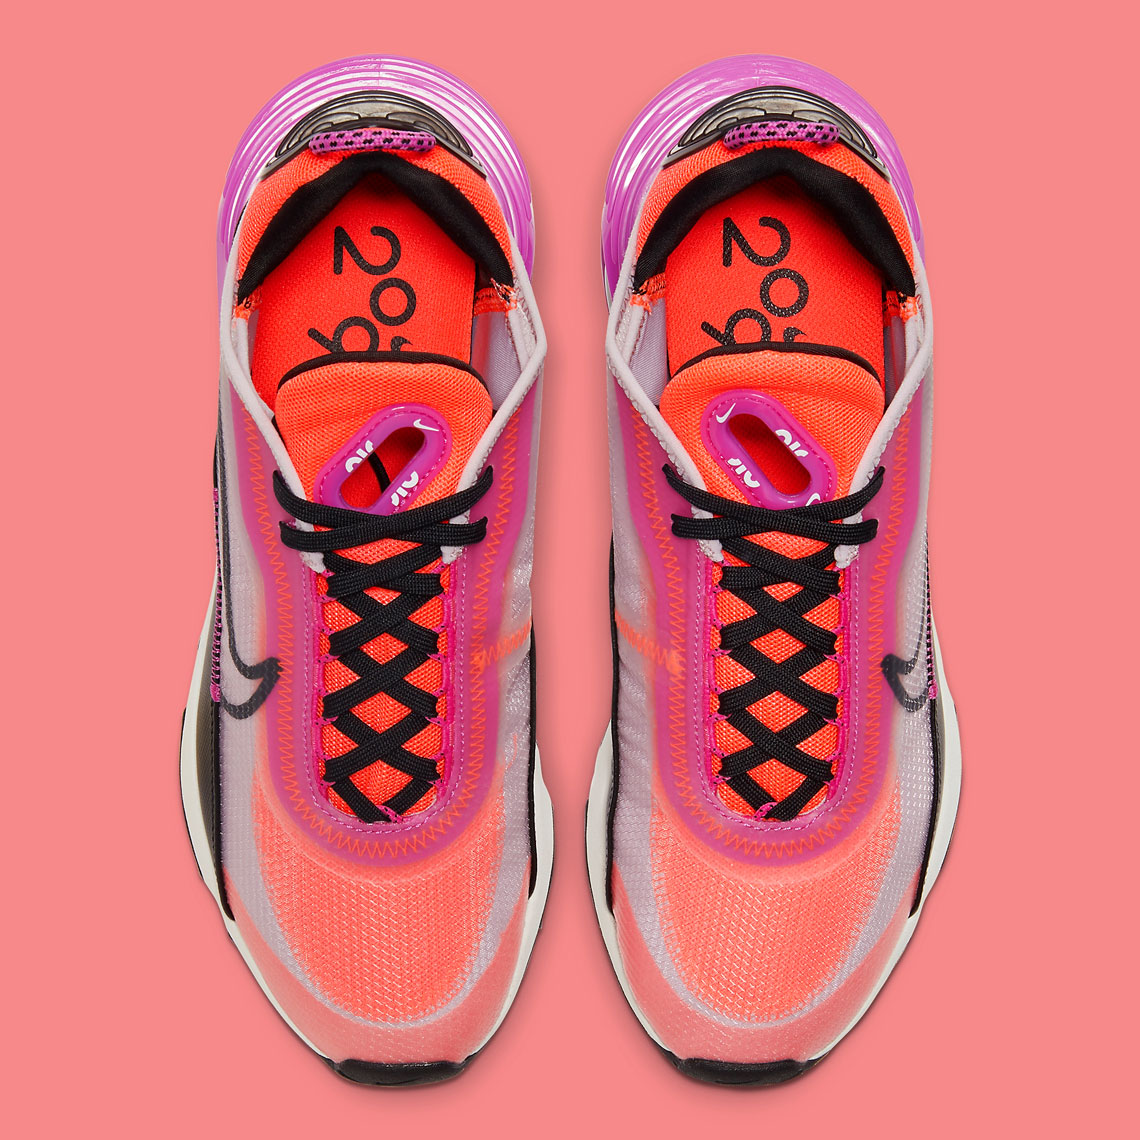 Nike Air Max 2090 &quot;Fire Pink&quot; Dropping Soon: Official Photos